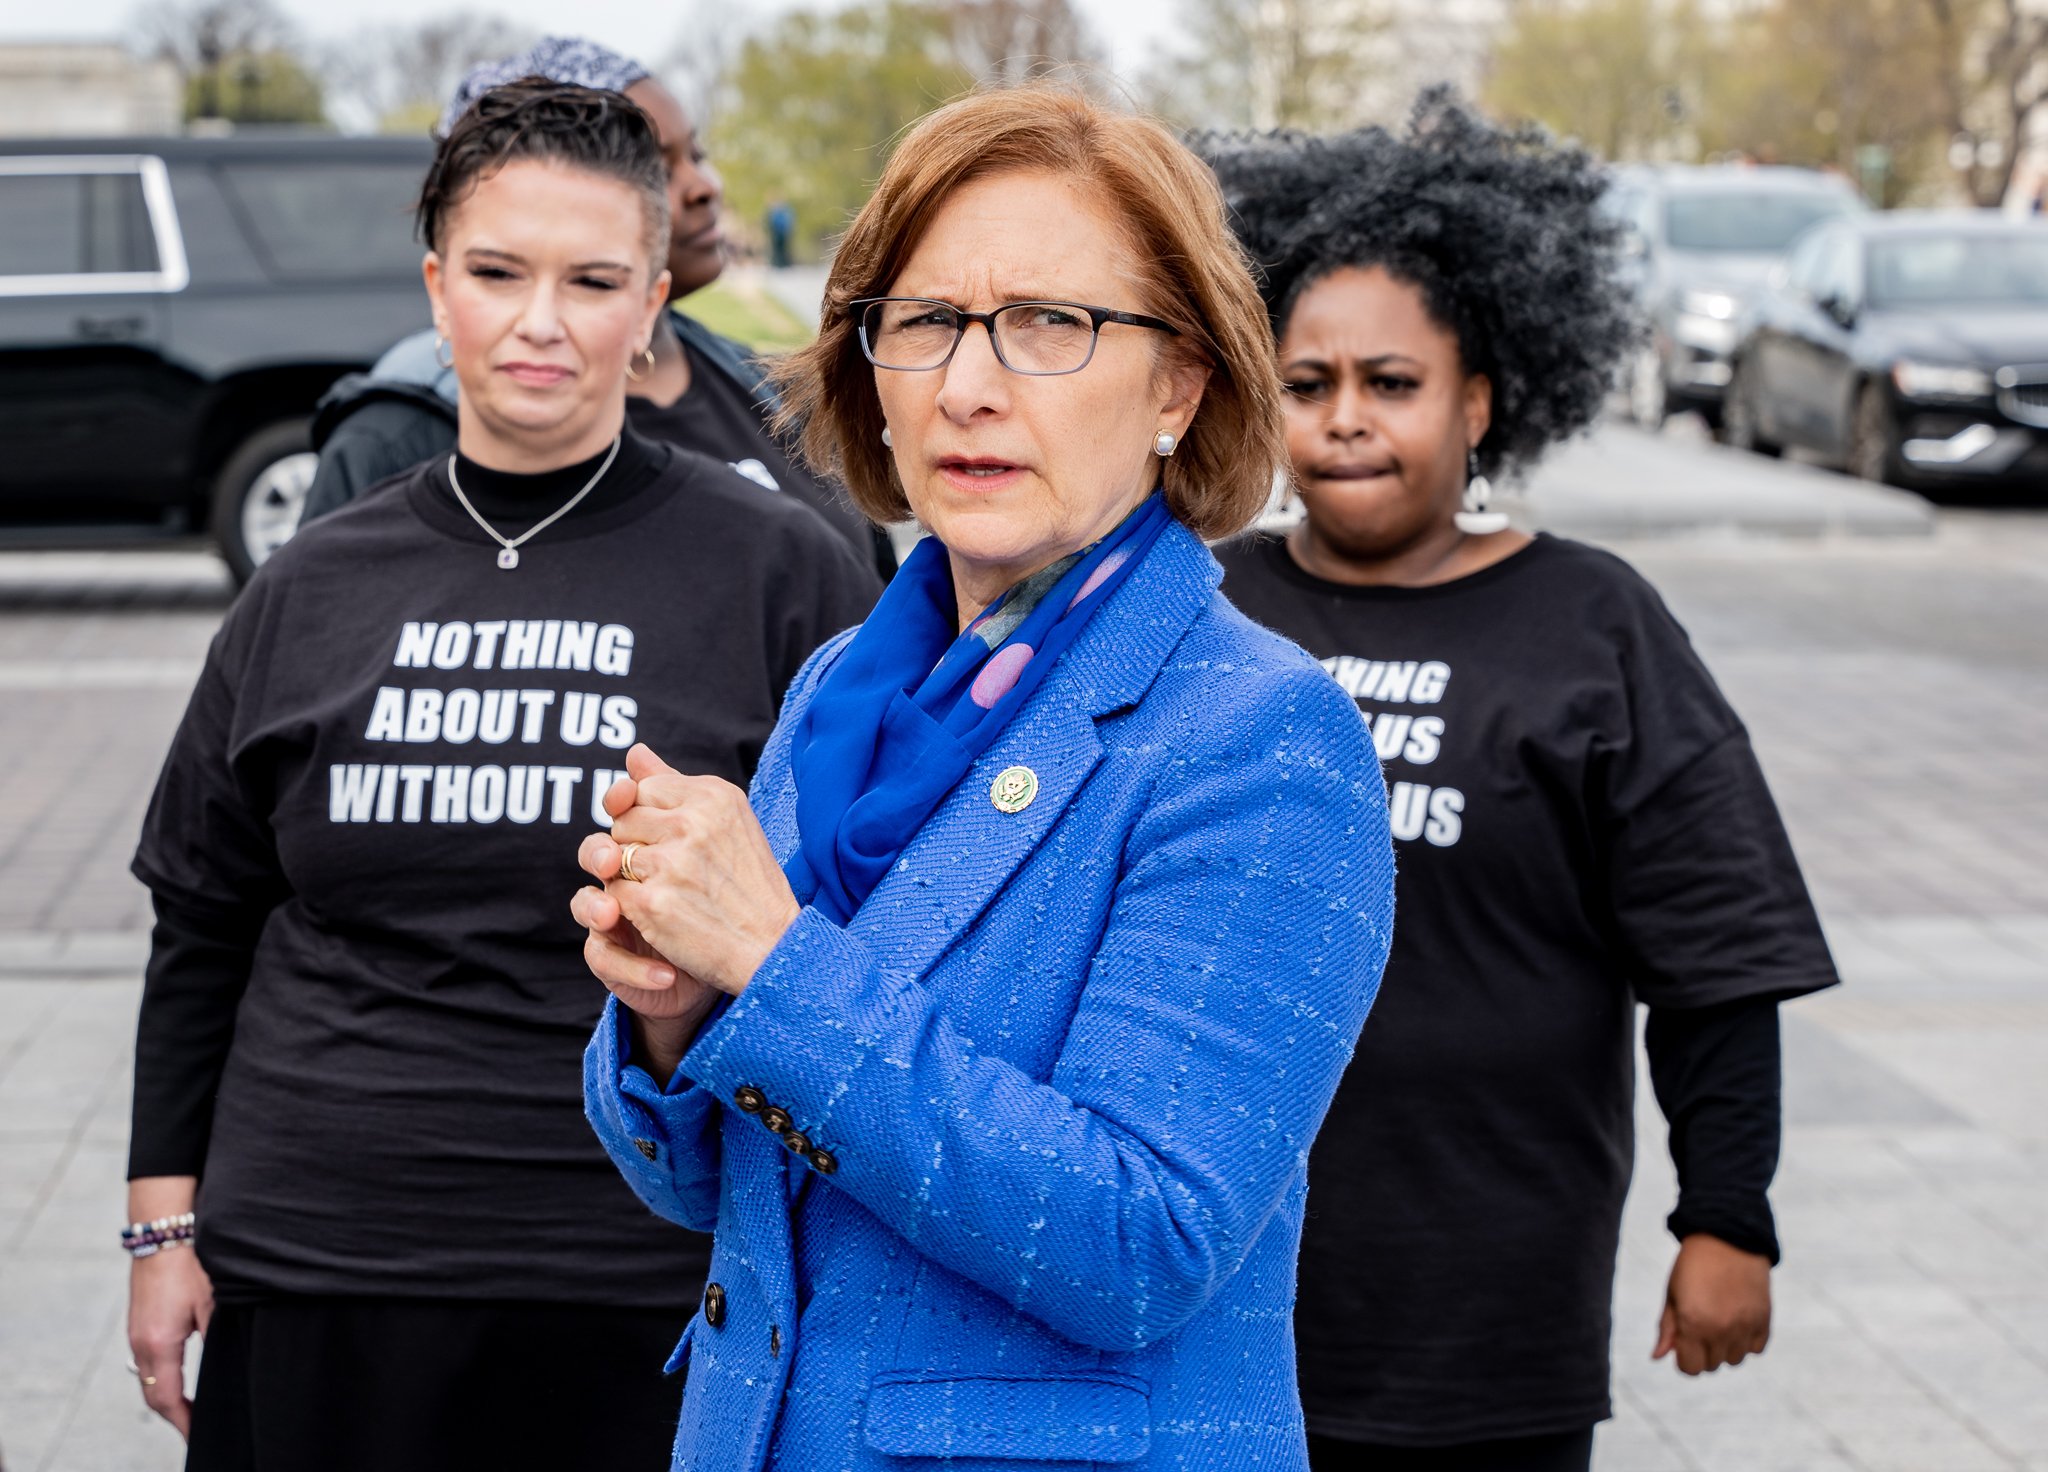 Representative Suzanne Bonamici stand in front of members of the National Parents Union